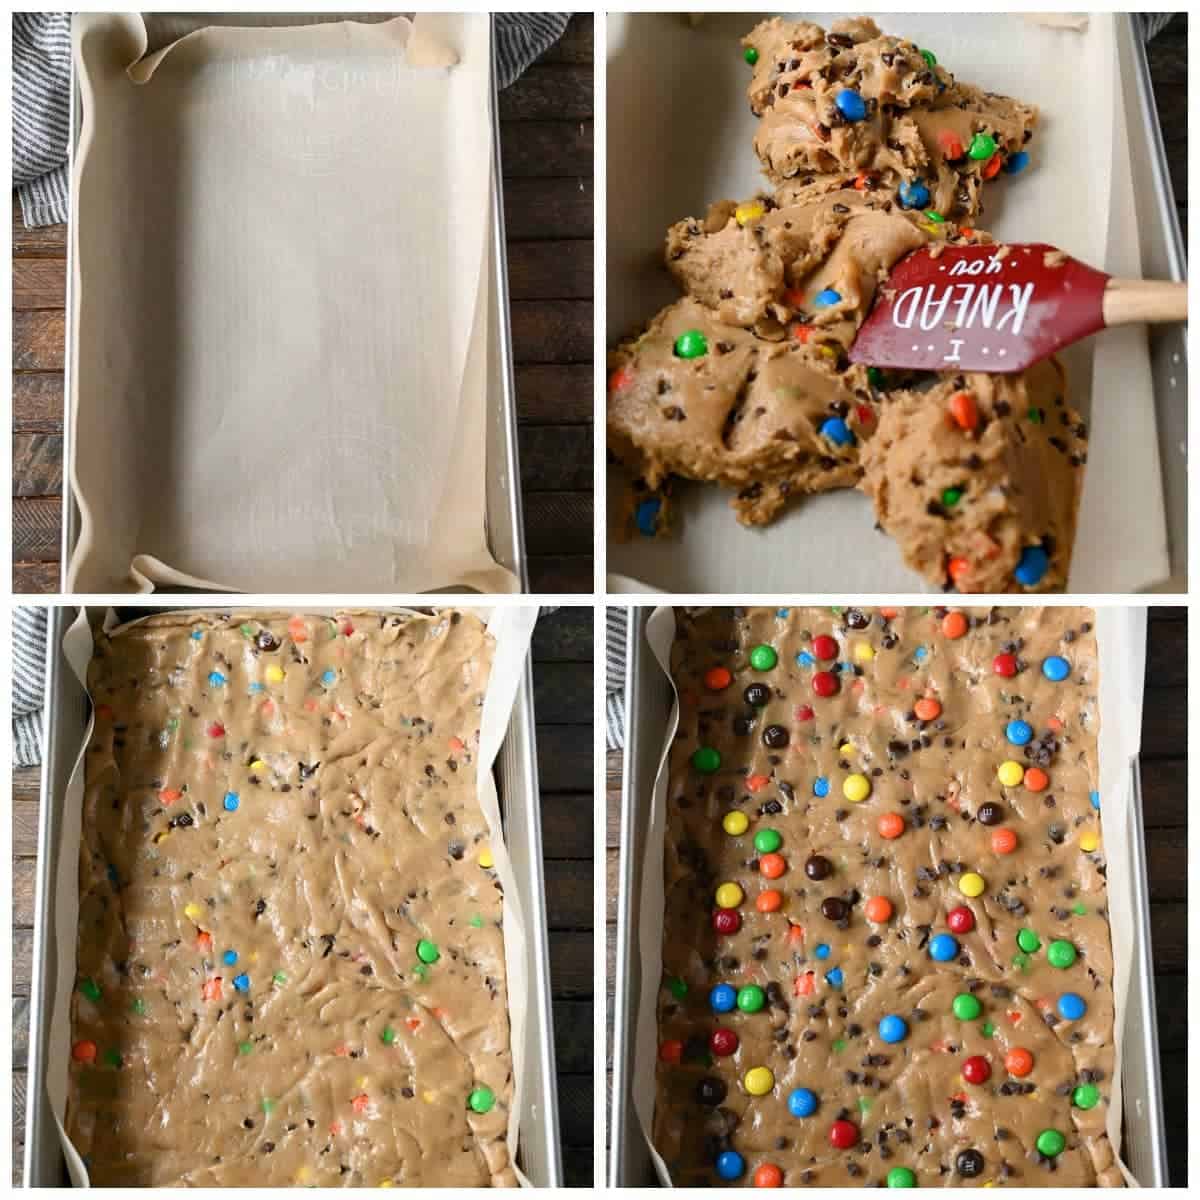 Cookie bars are pressed into a baking pan.